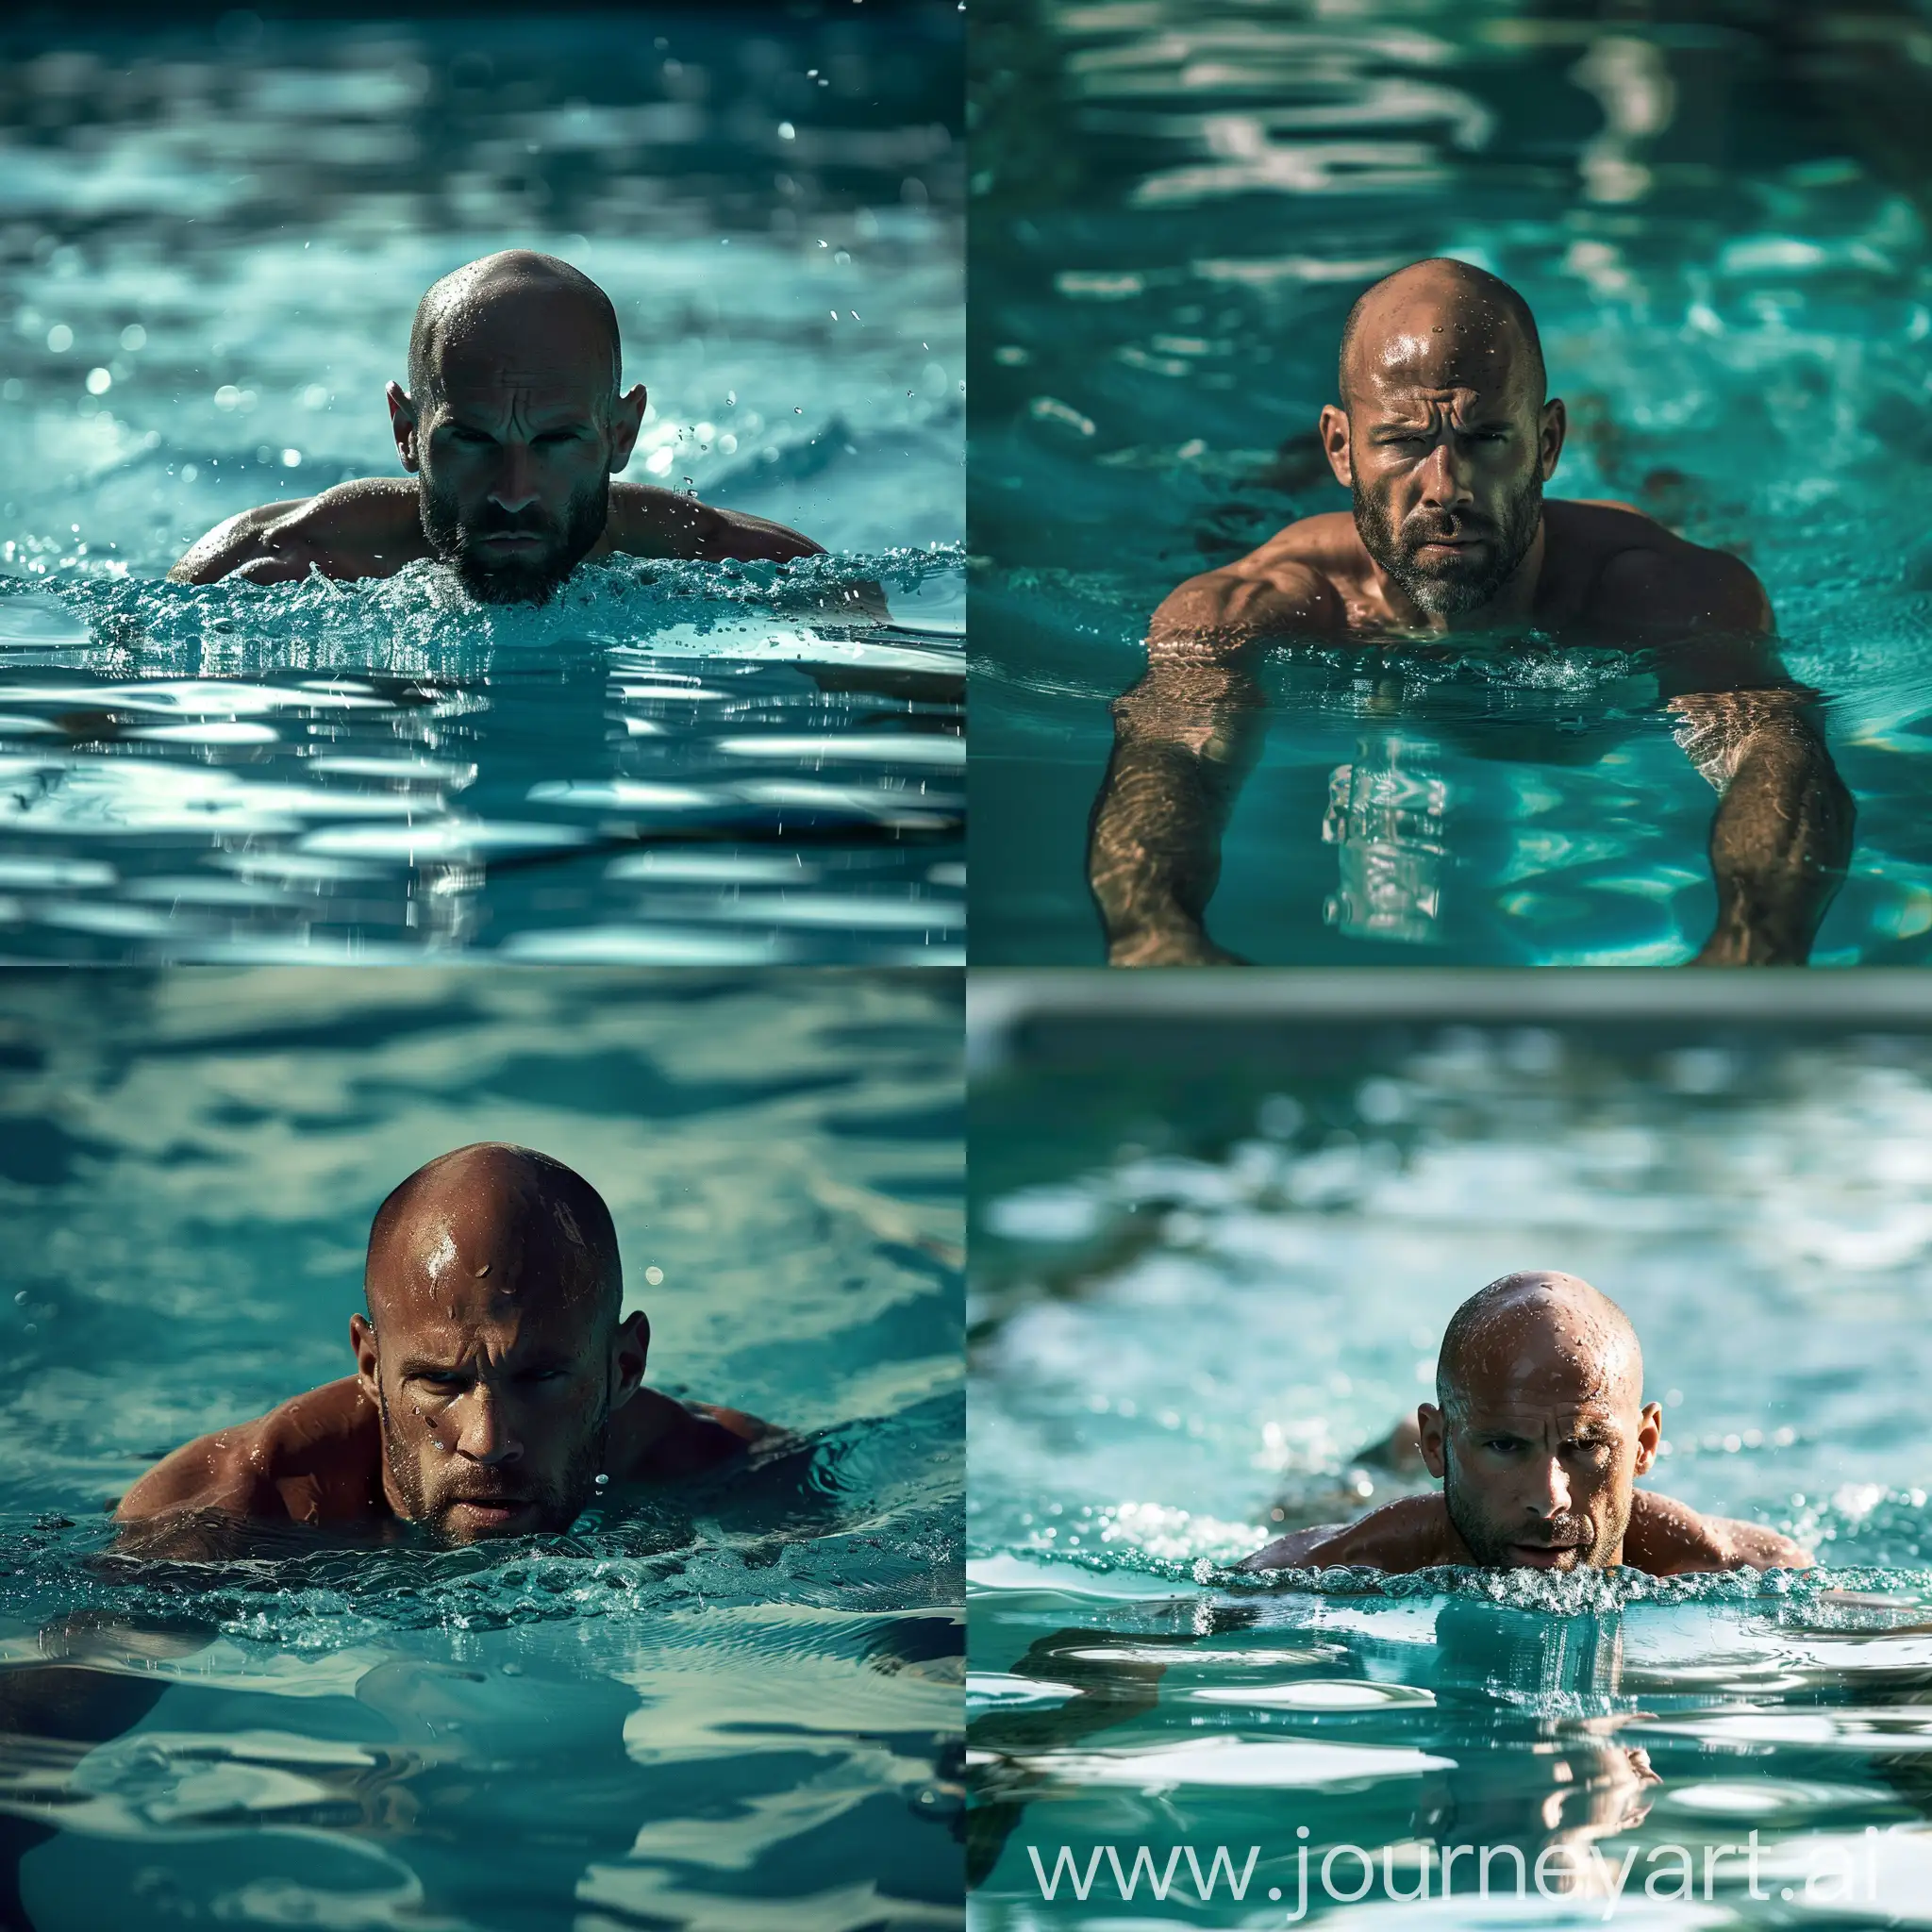 Jason Statham swims in the pool
